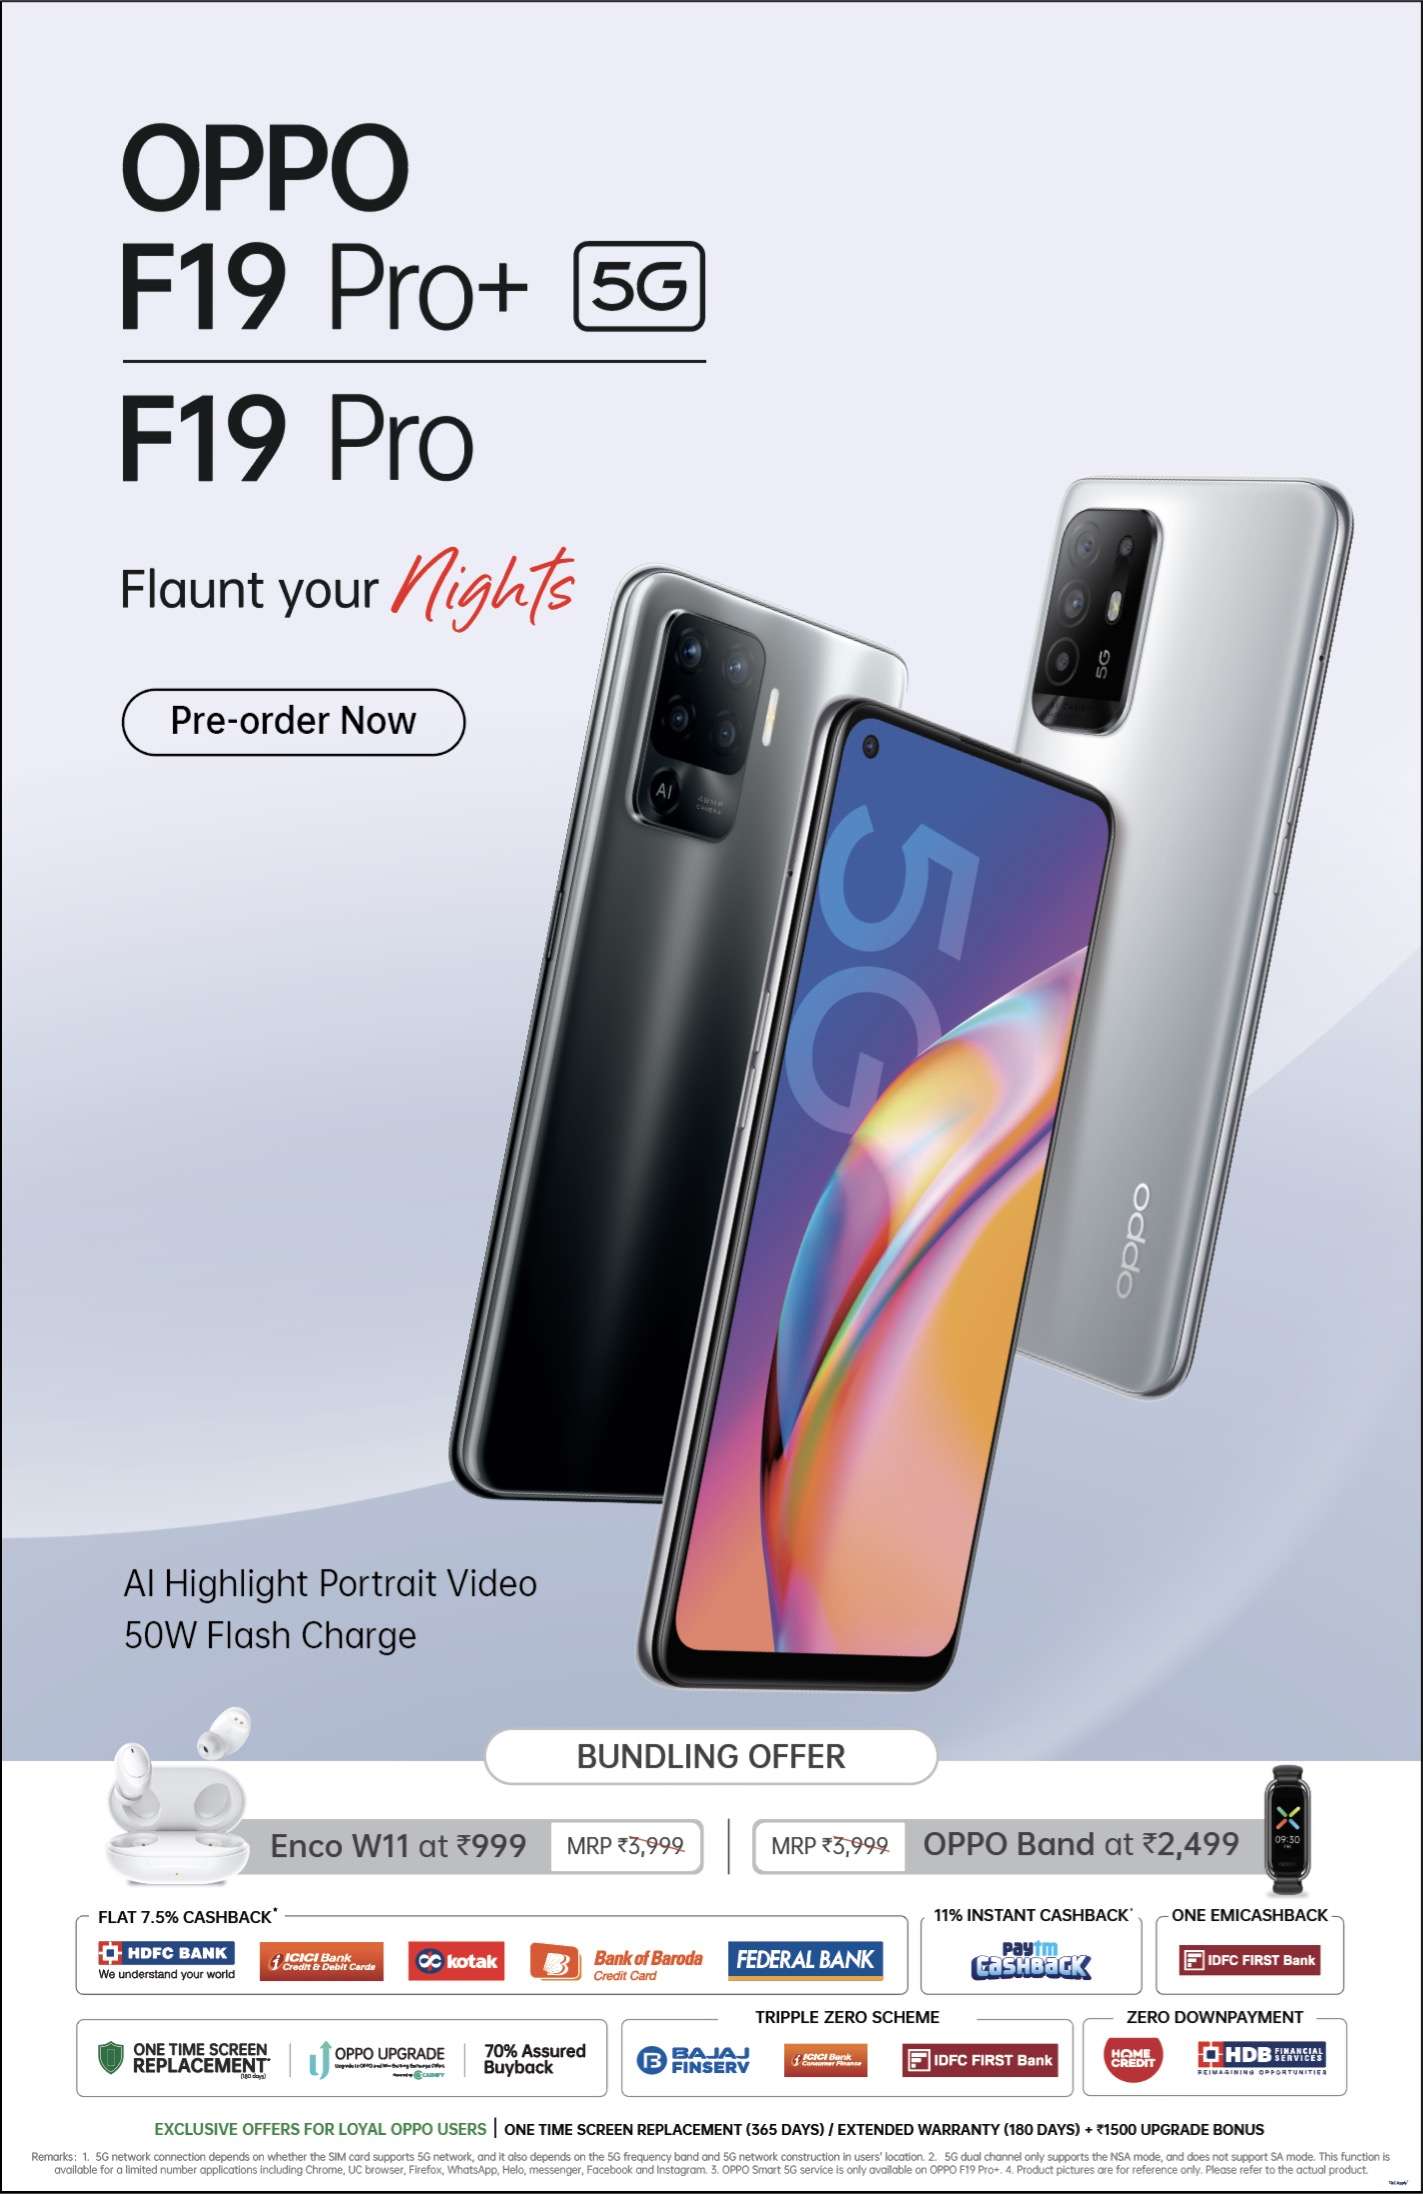 Oppo records Rs 2300 crore sales from F19 Pro series in 3 days